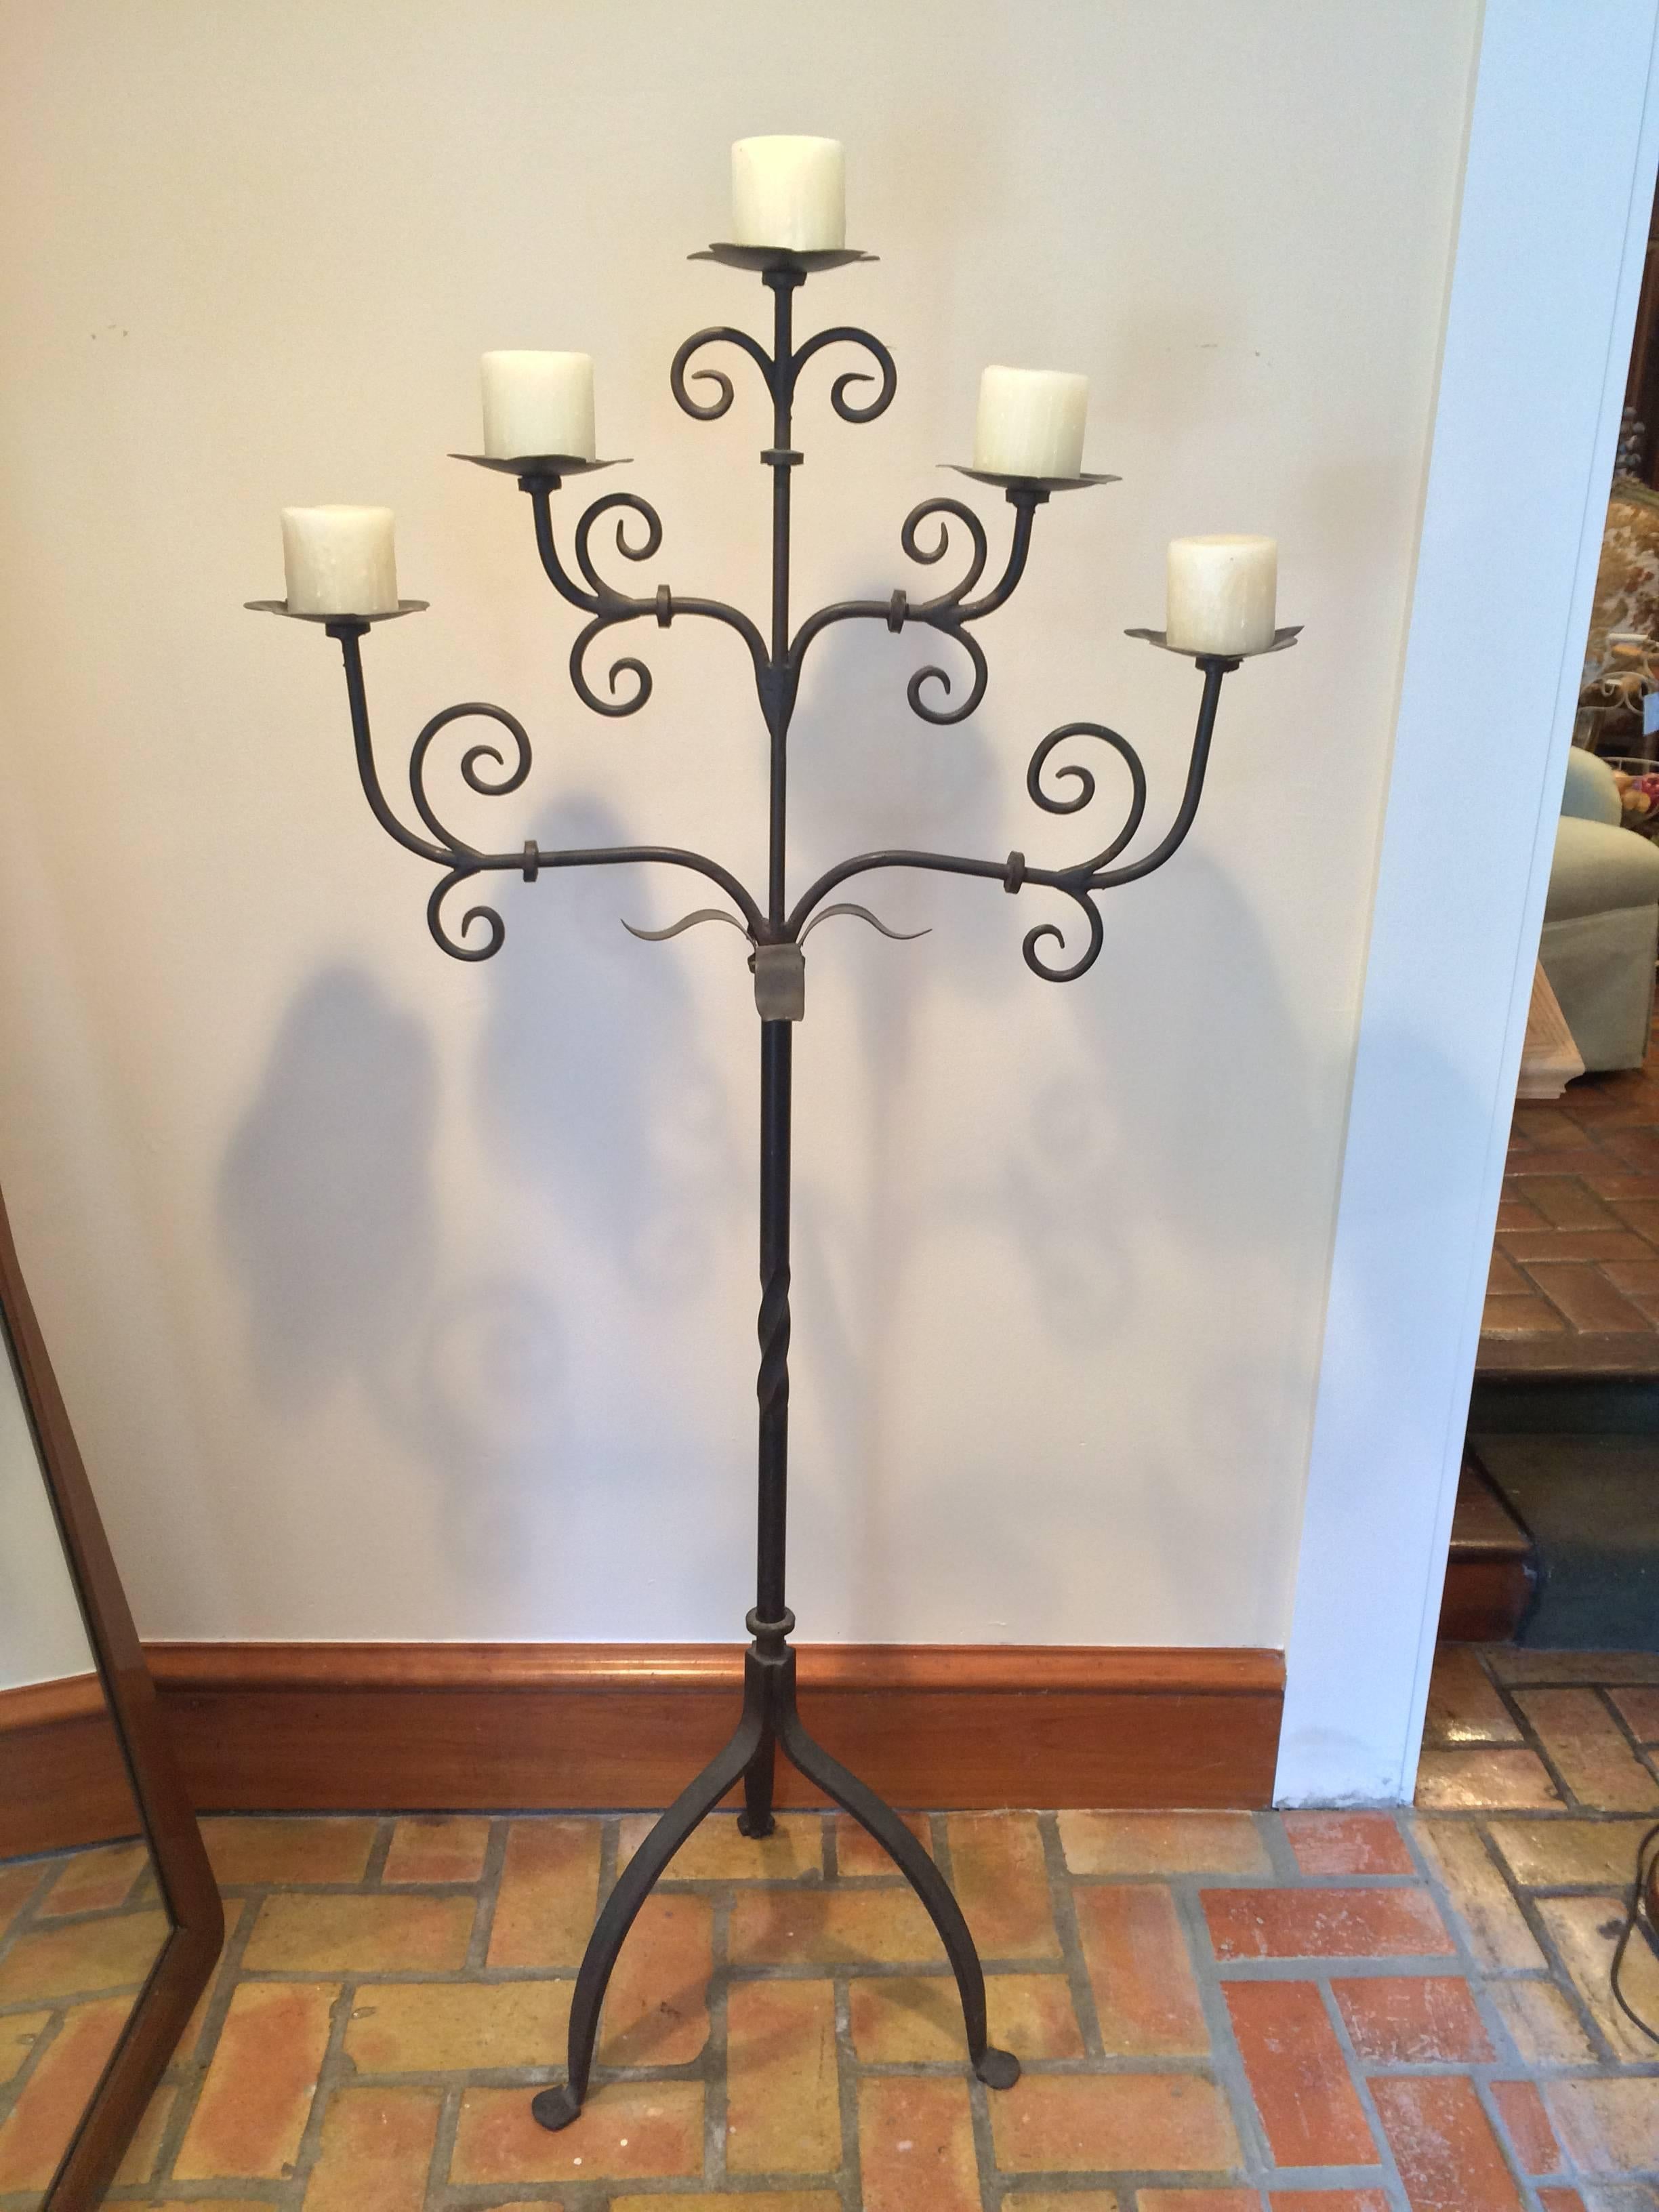 Handmade wrought iron candelabra. We believe this to be a piece by Arte De Mexico but cannot find a stamp or signature. Holds five large candles and would add romance and ambiance to any patio or bedroom. Large and heavy . Very sturdy balanced